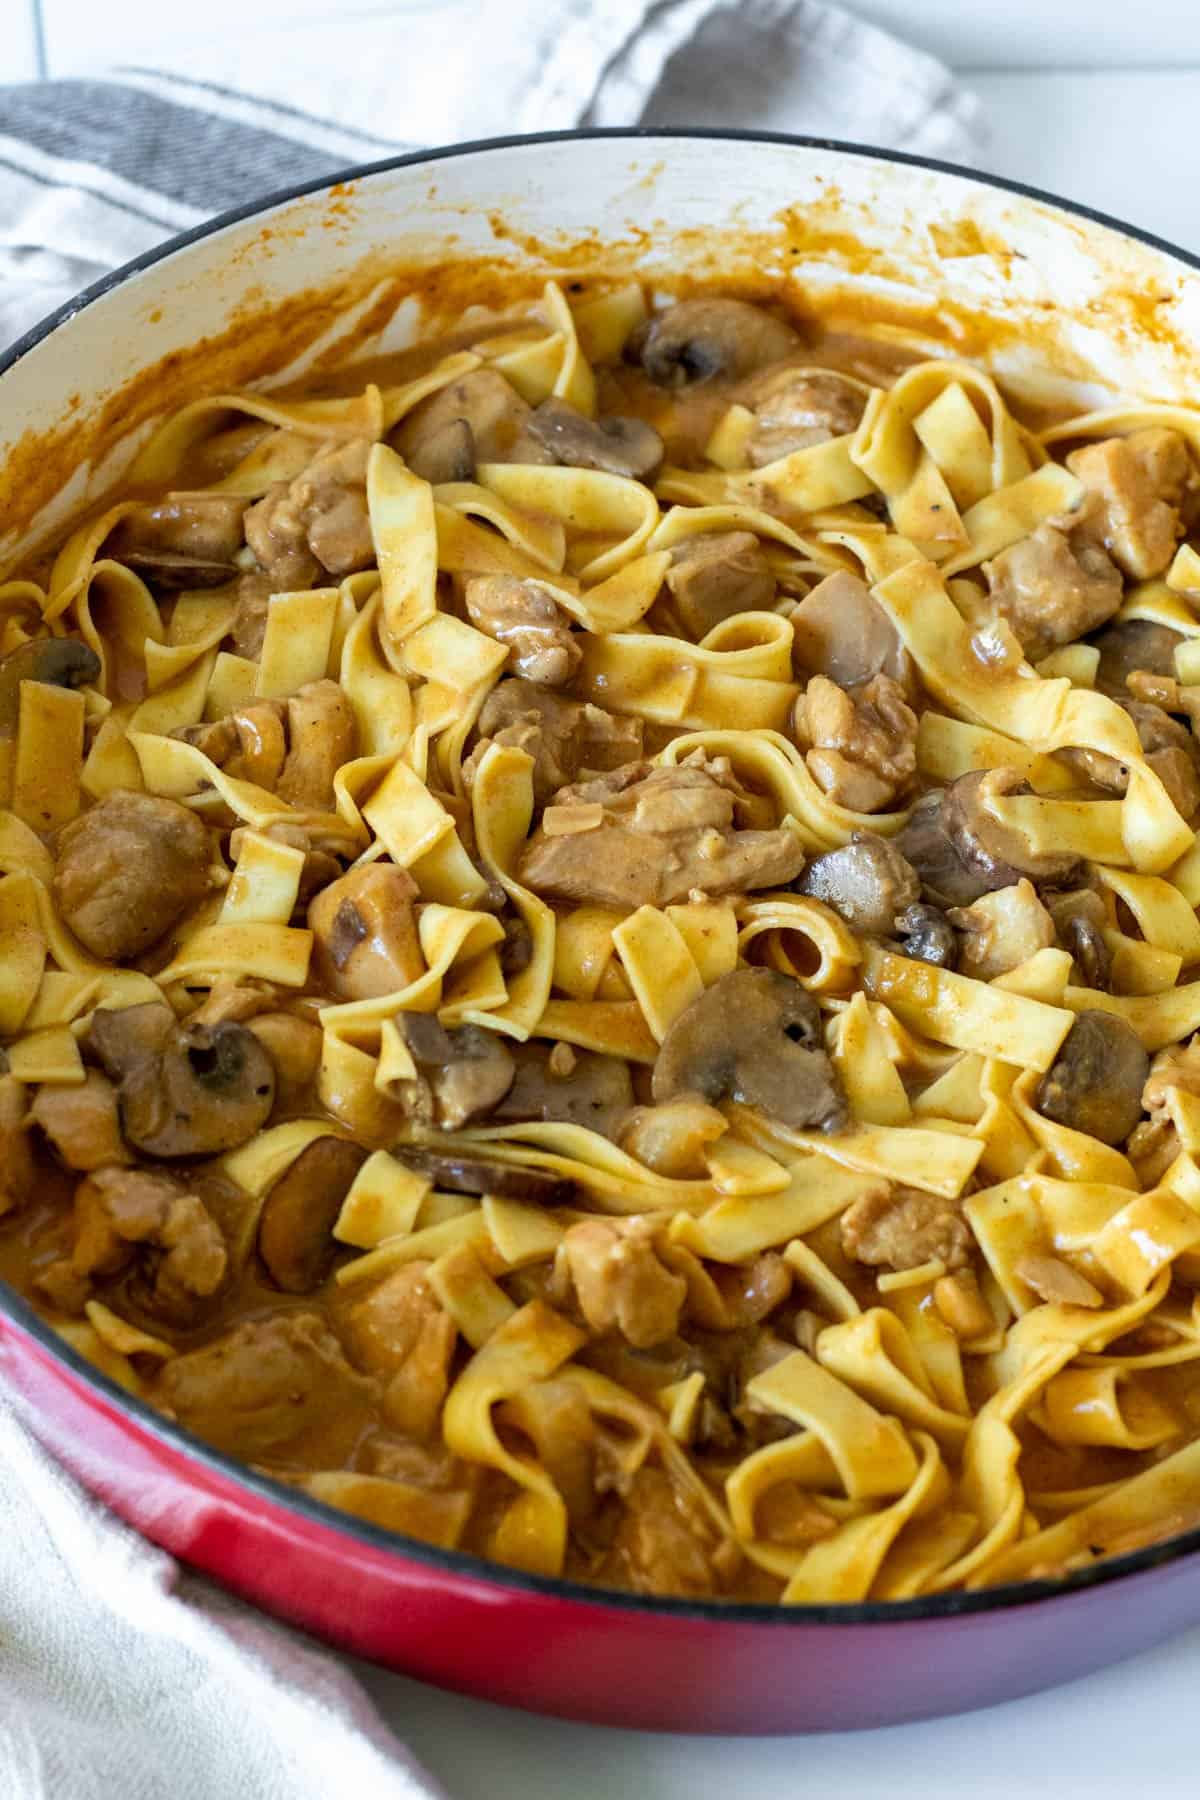 Skillet of chicken stroganoff with egg noodles tossed in.